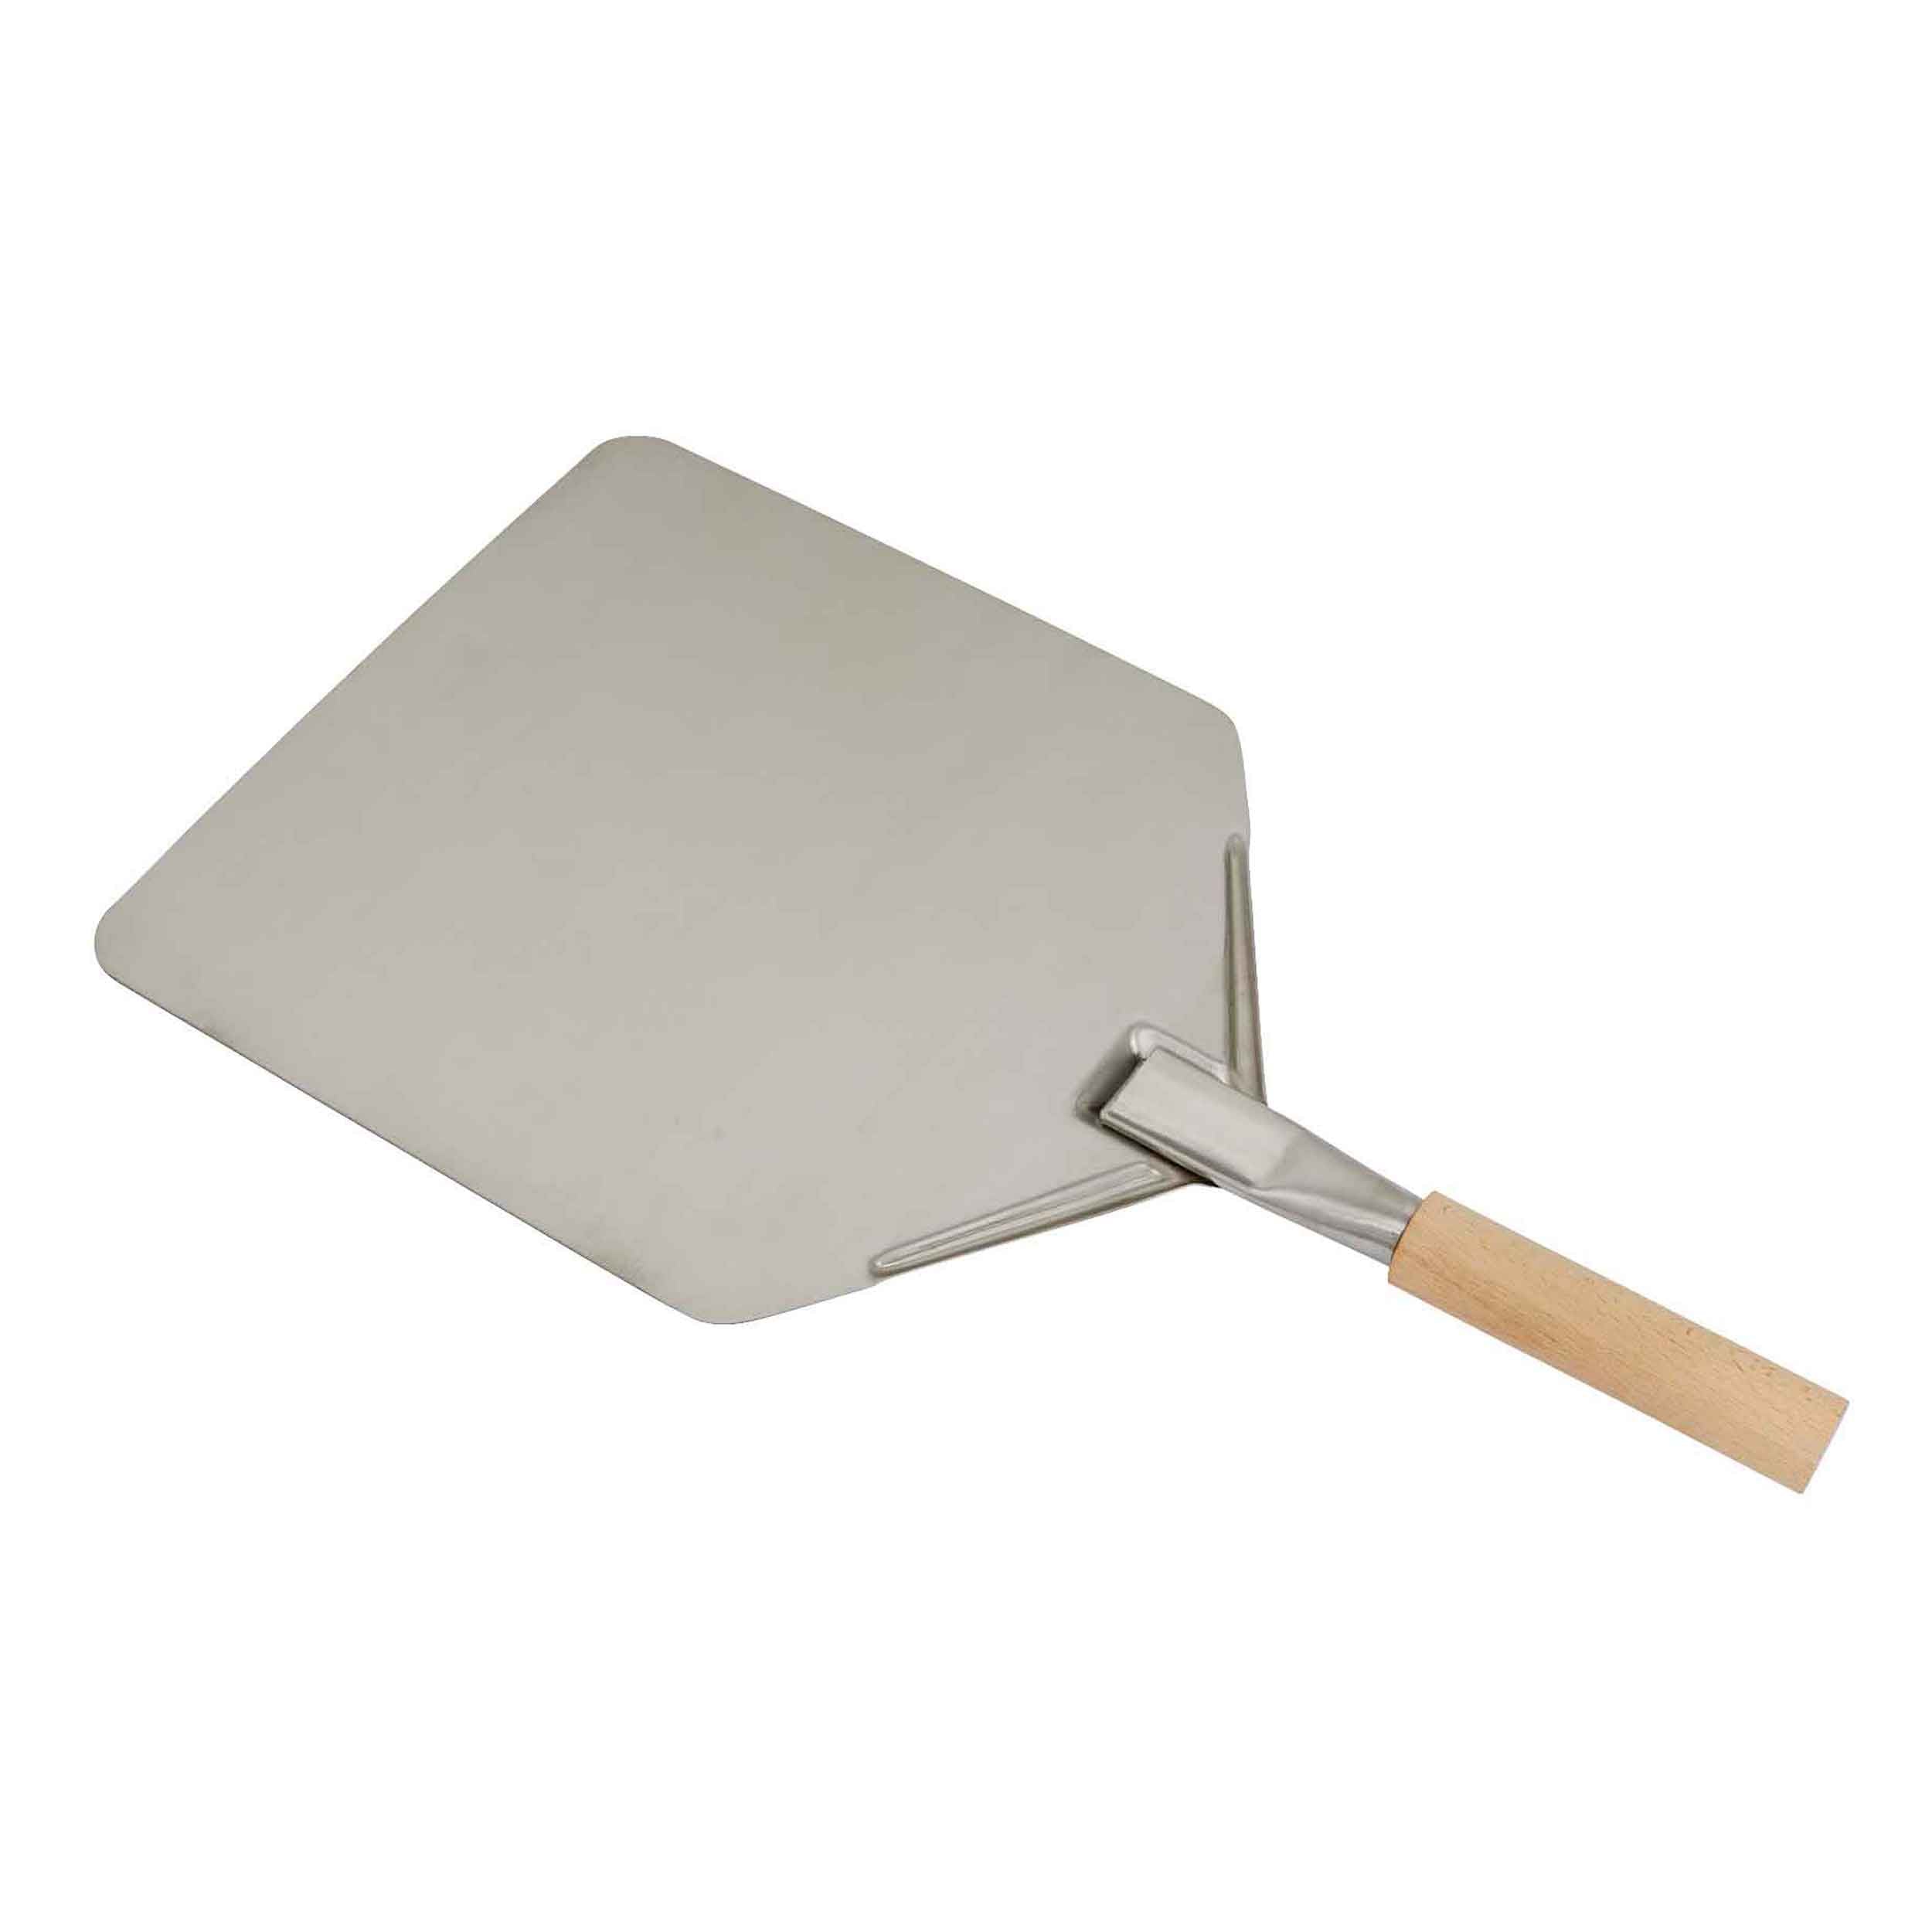 Stainless Steel Pizza Peel, 11 x 15 with 5 Wooden Handle - DG39